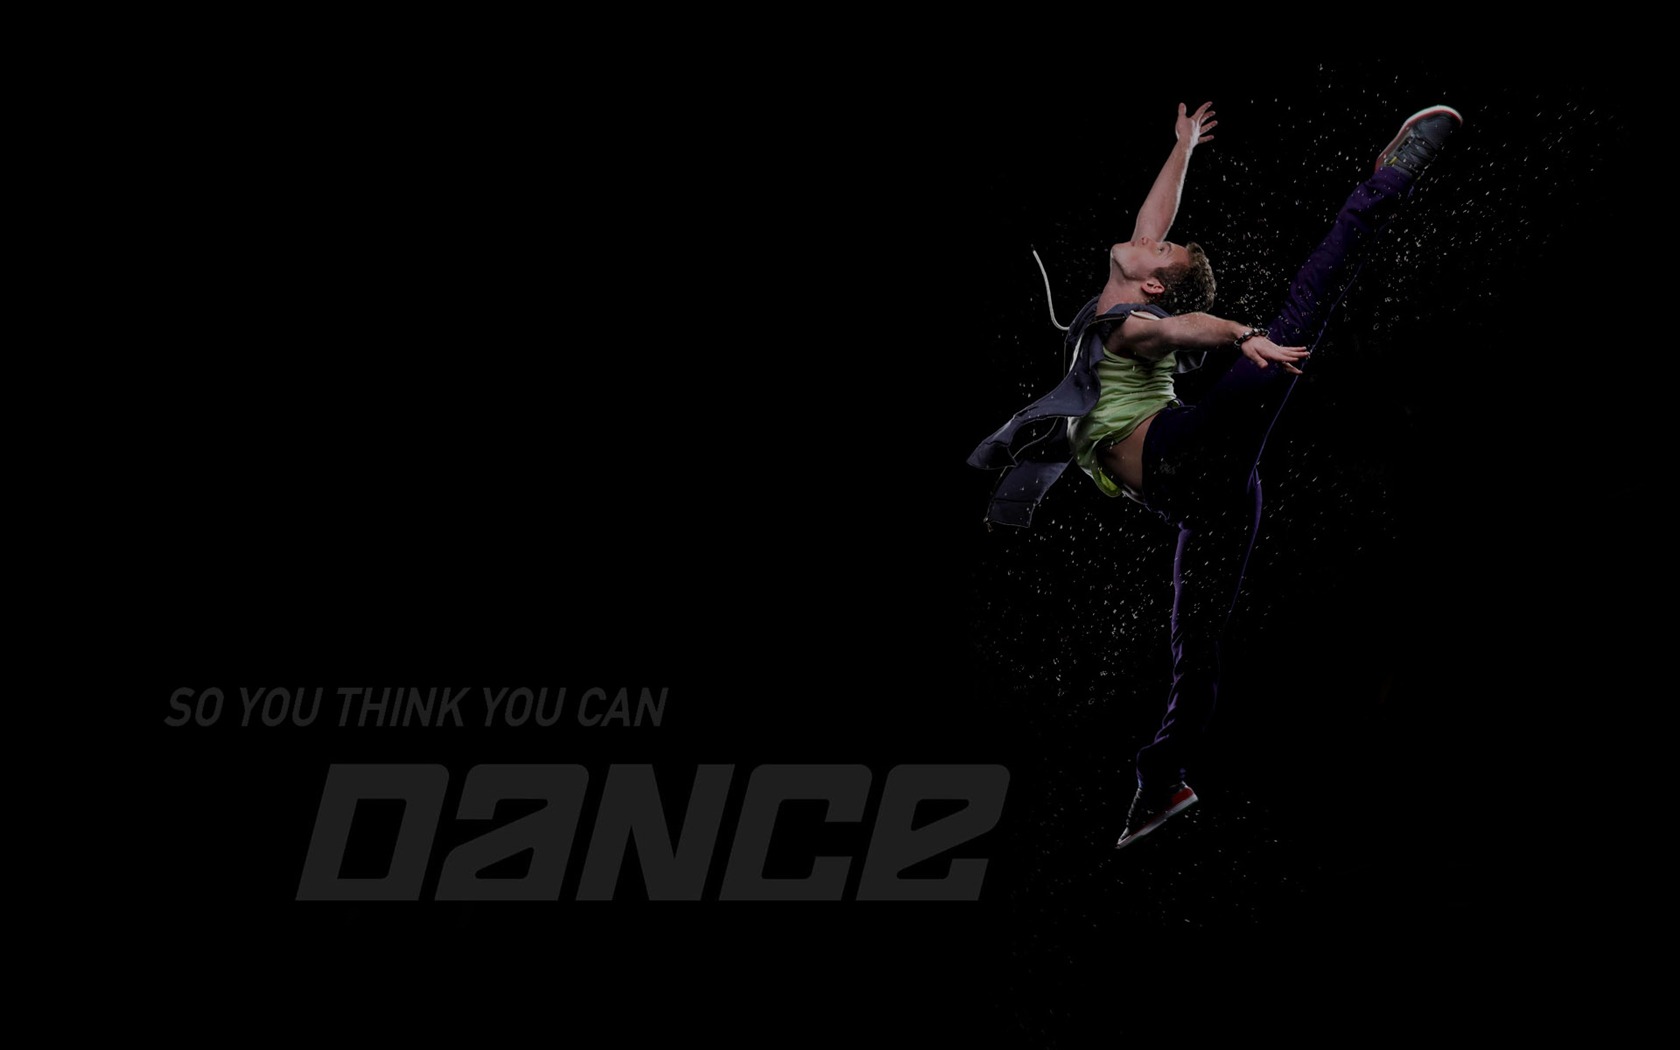 So You Think You Can Dance 舞林争霸 壁纸(二)8 - 1680x1050